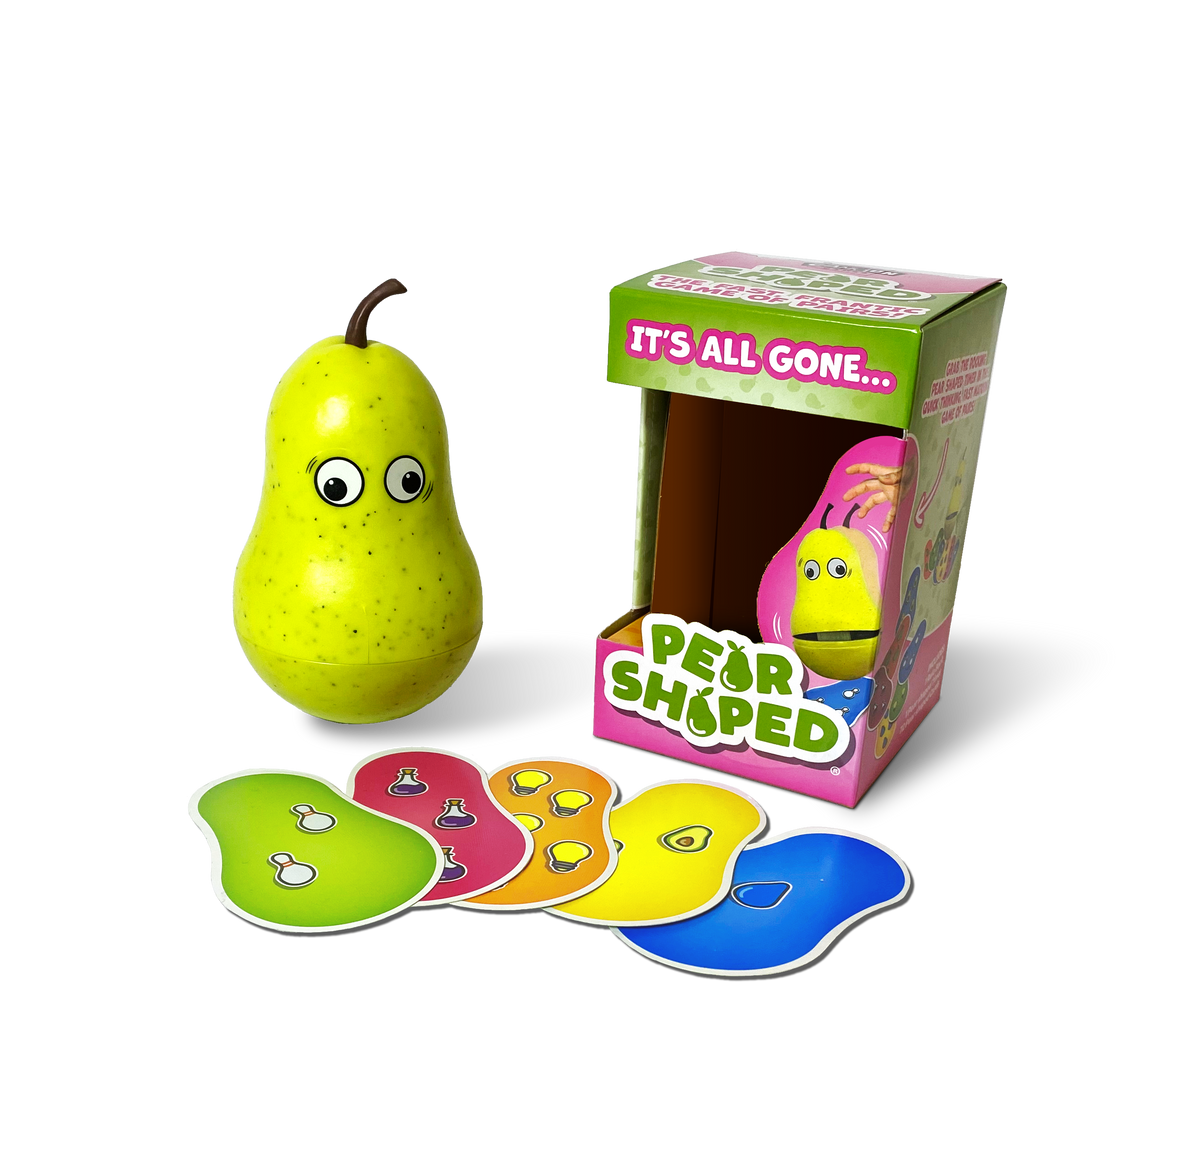 Pear shaped game box with pear and cards outside of it